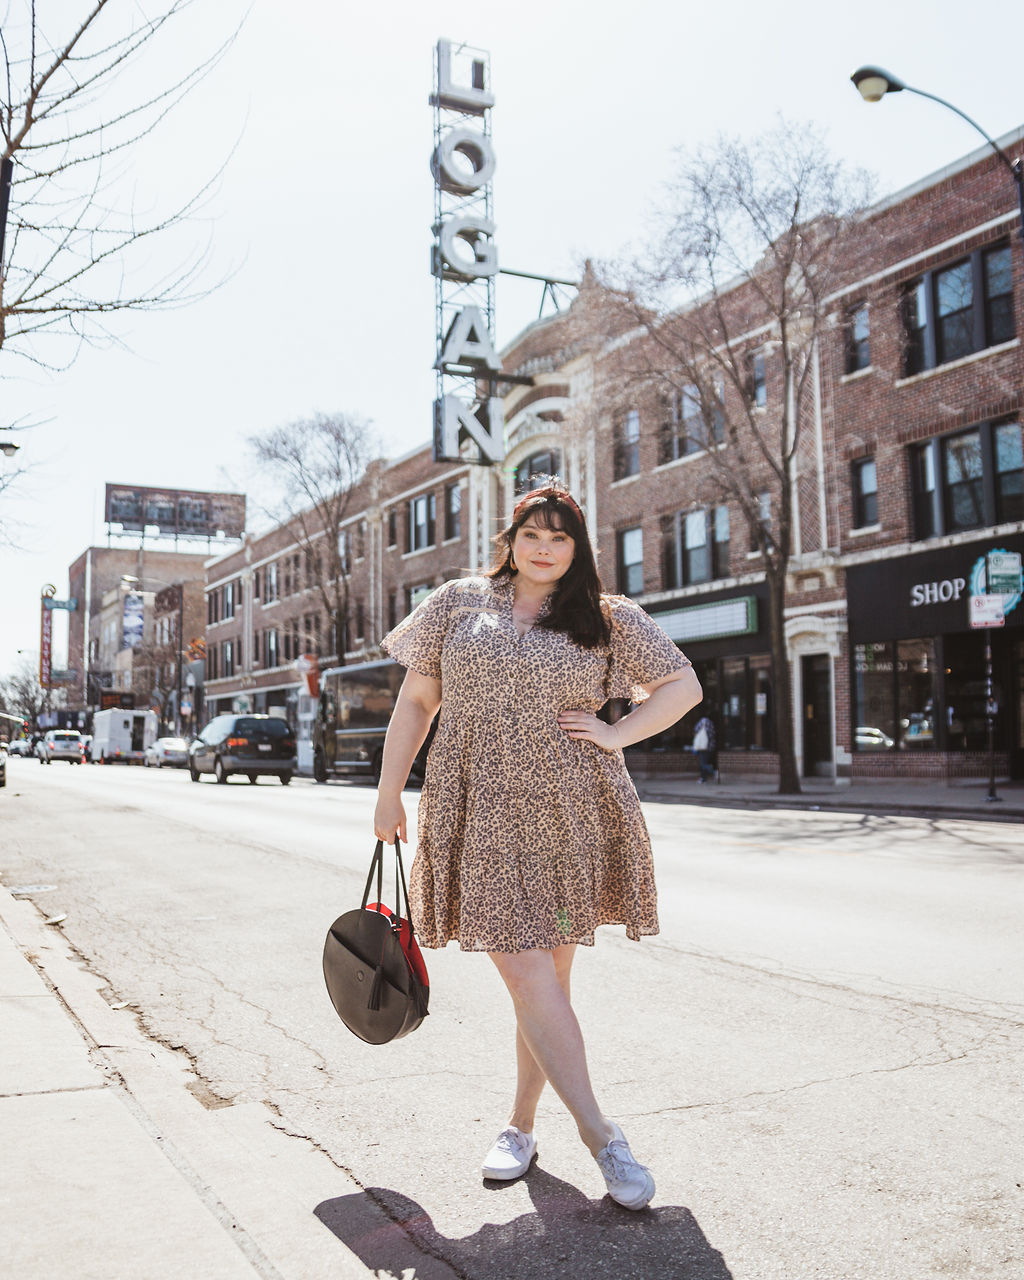 OOTD Plus Size Leopard Dress from Anthropologie